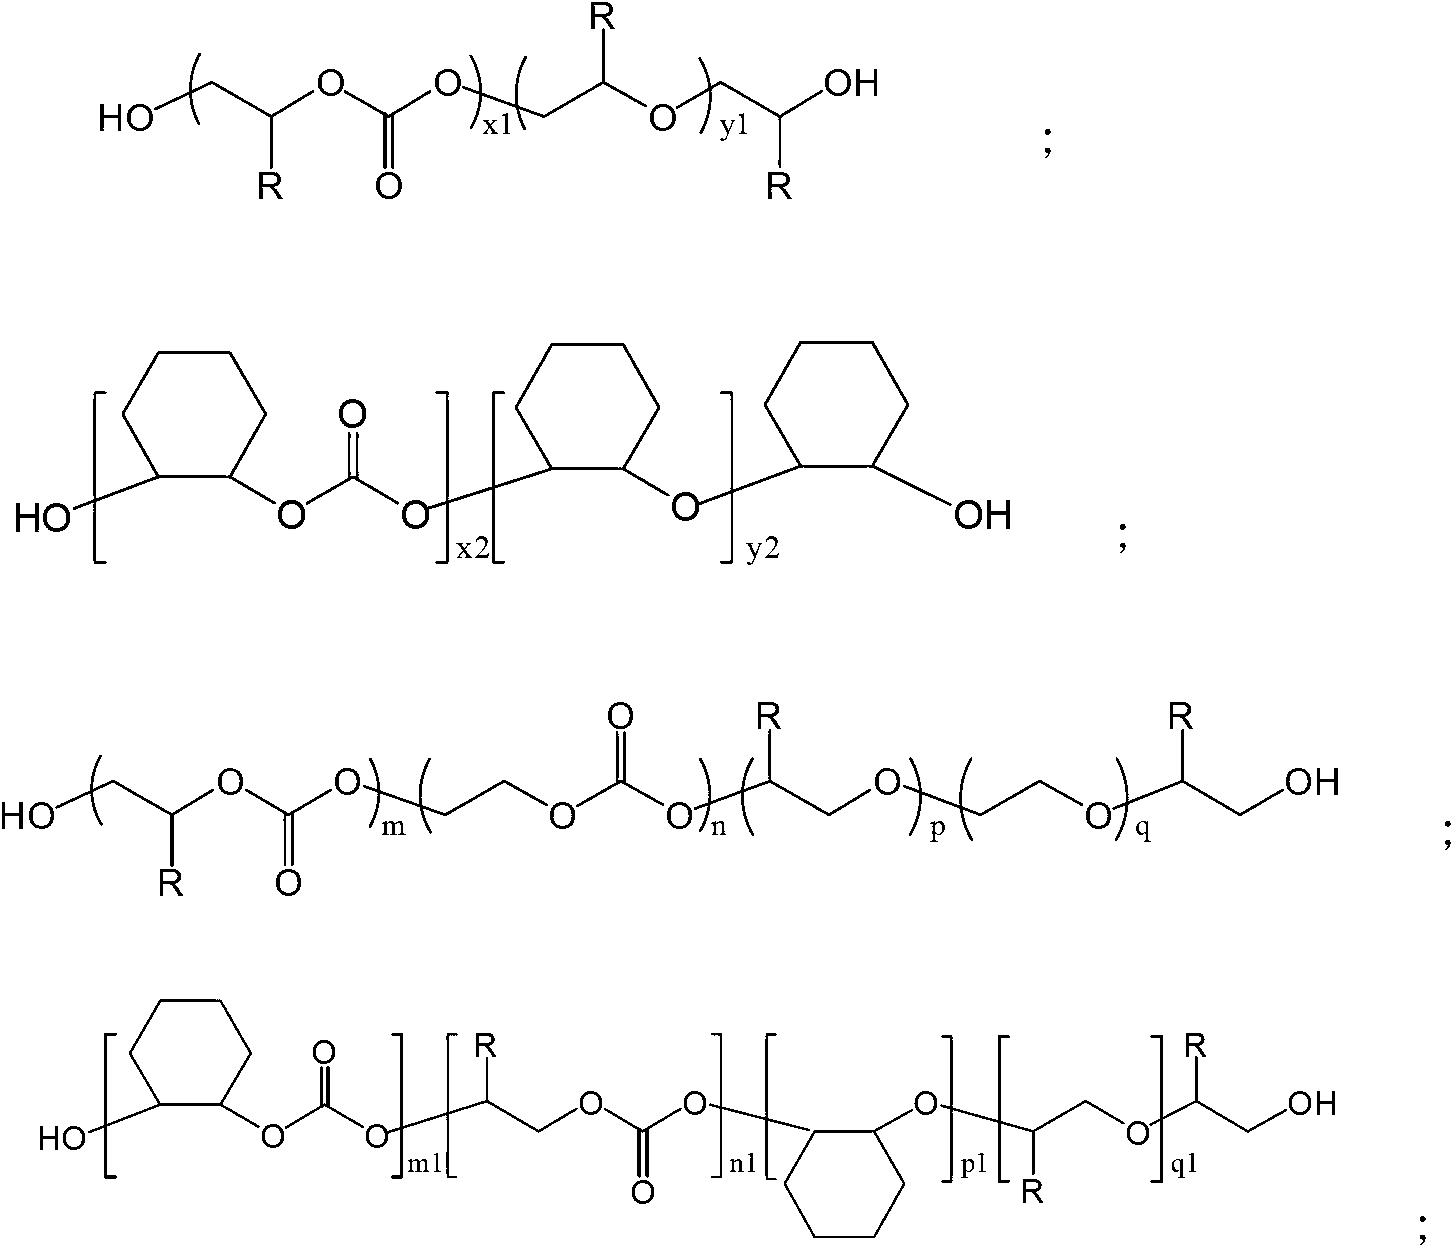 RAFT (Reversible Addition-Fragmentation chain Transfer) reaction reagent based on low molecular weight carbon dioxide copolymer and preparation method of RAFT reaction reagent